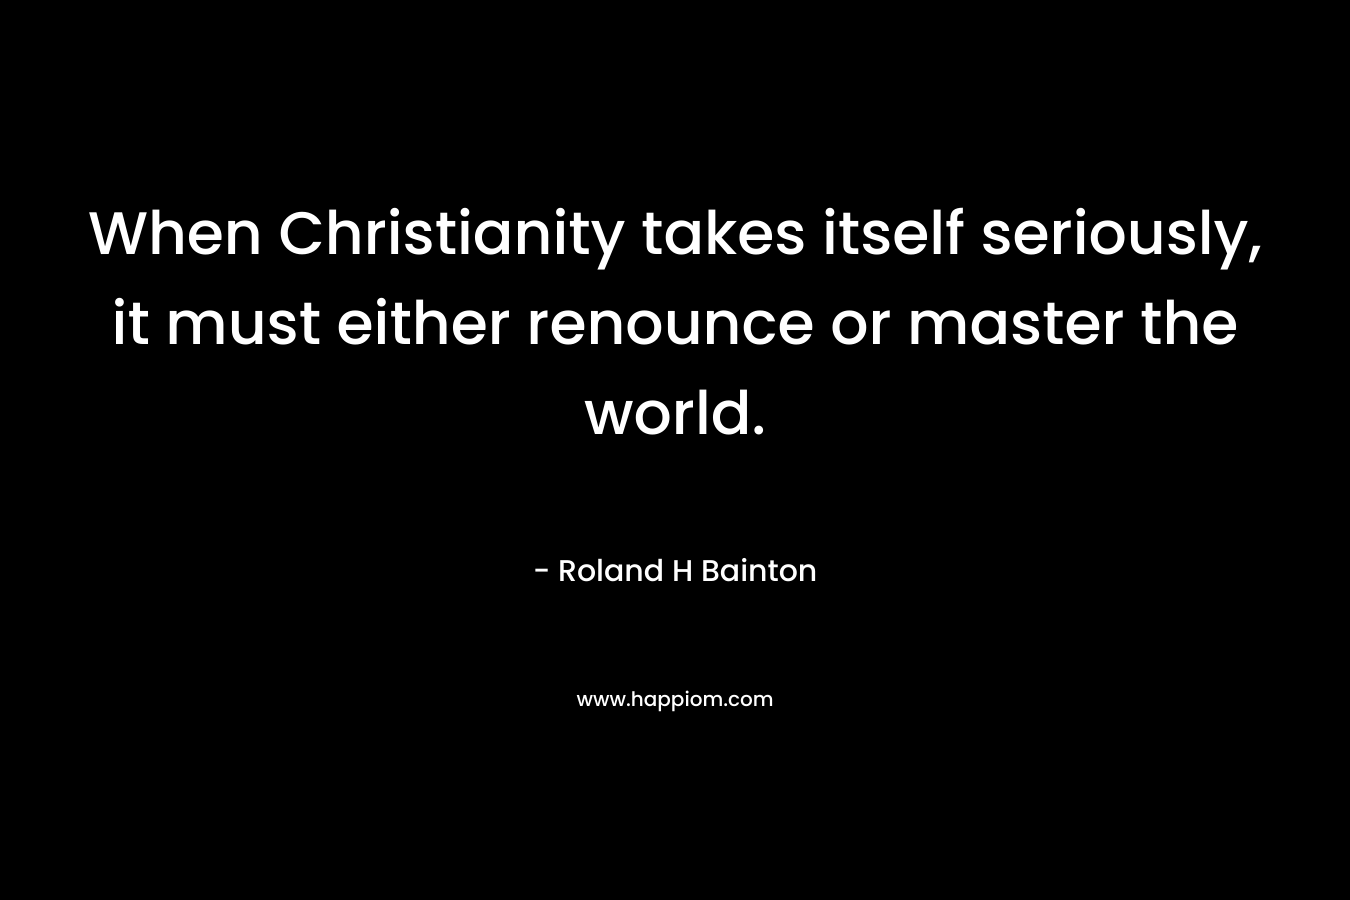 When Christianity takes itself seriously, it must either renounce or master the world.